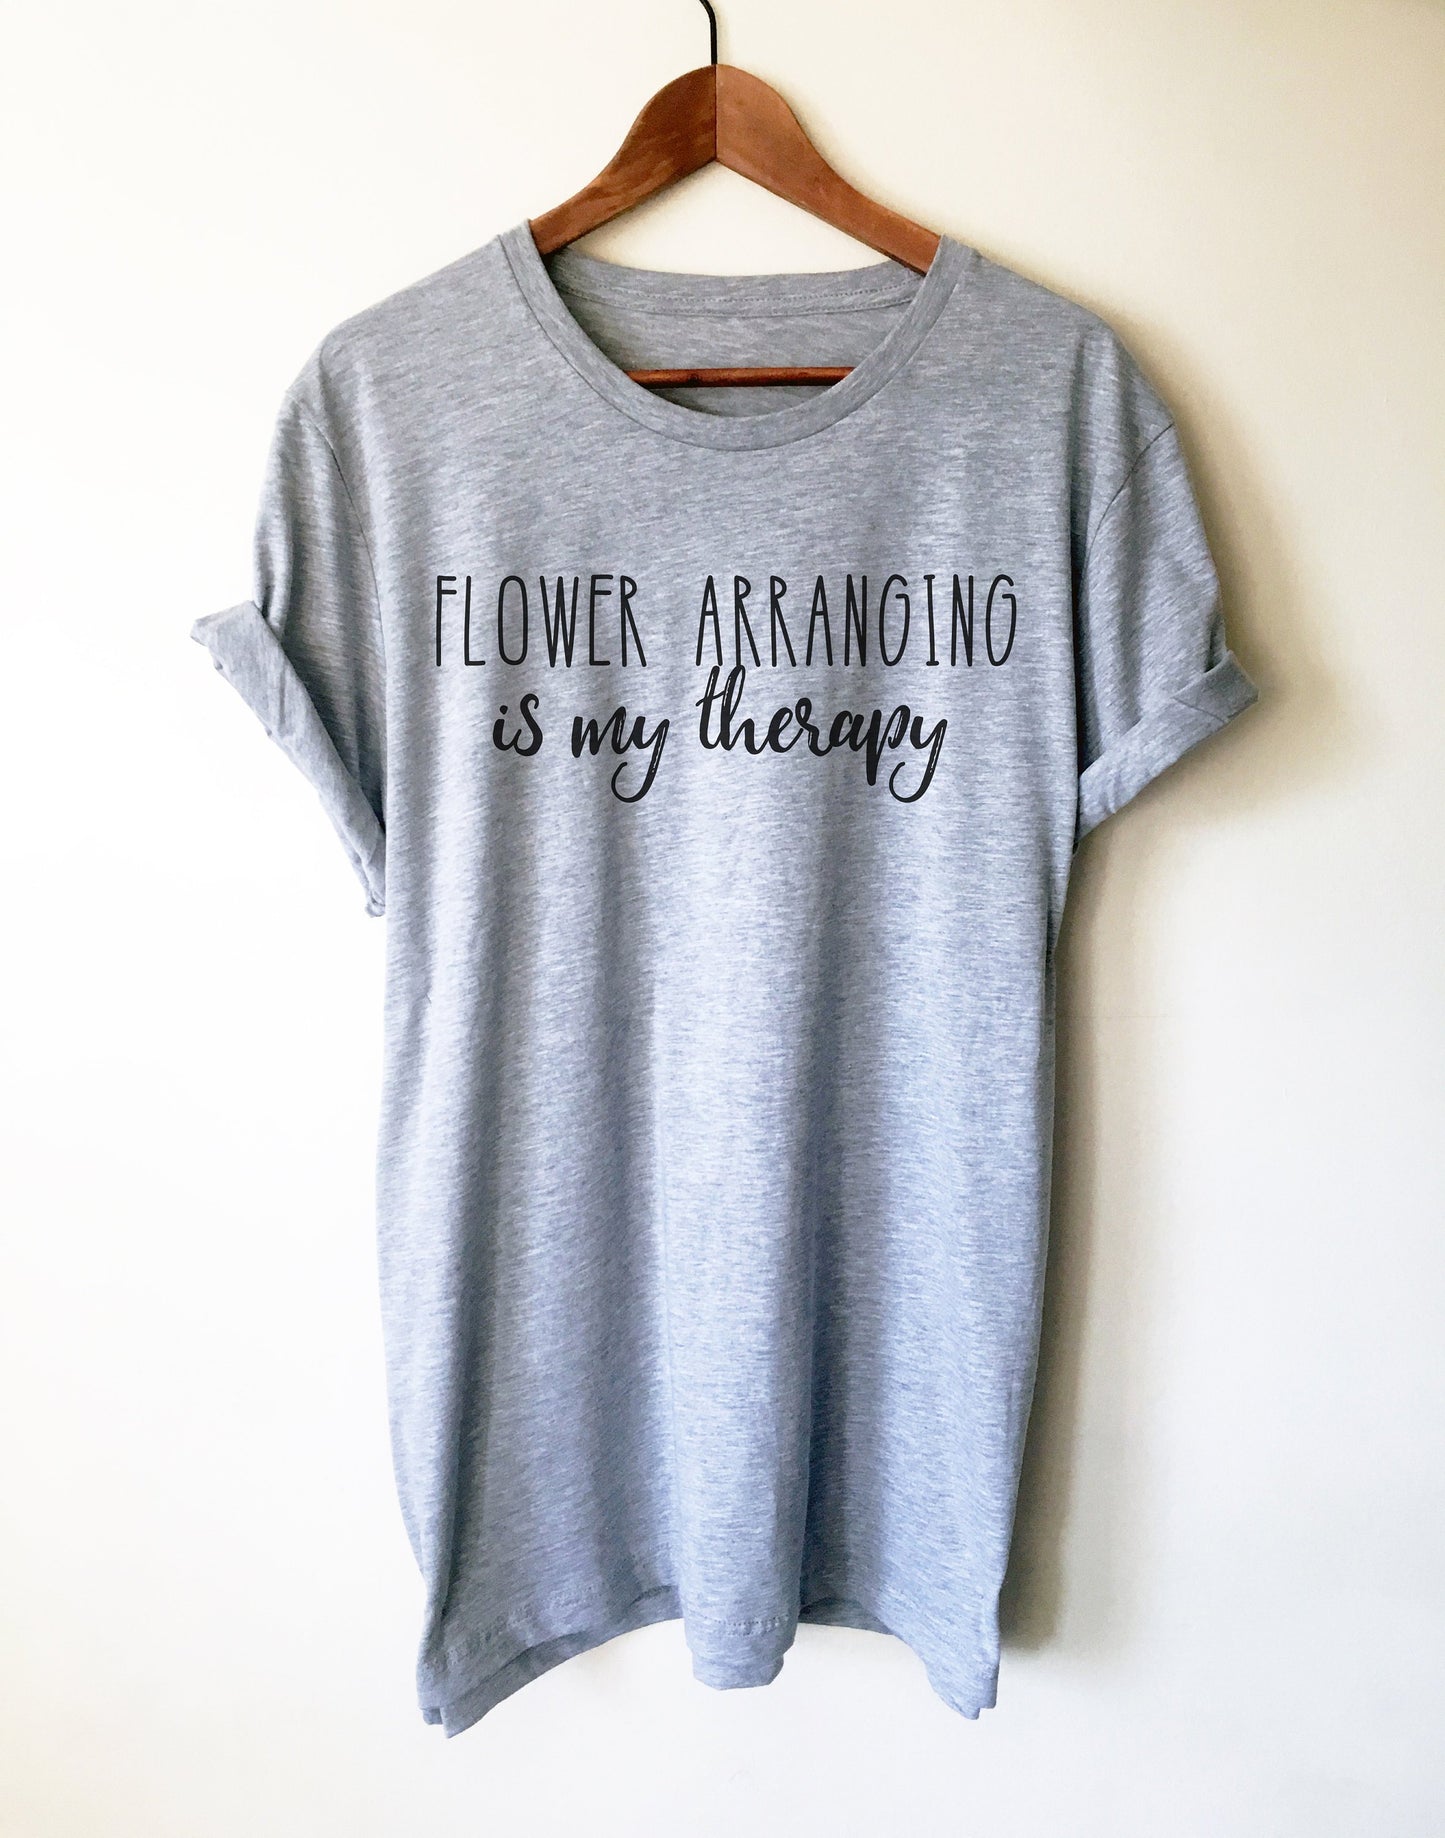 Flower Arranging Is My Therapy Unisex Shirt - Florist Shirt, Florist Gift, Flower Arranging Gift, Flower Shirt, Flower Gift, Gardener Shirt